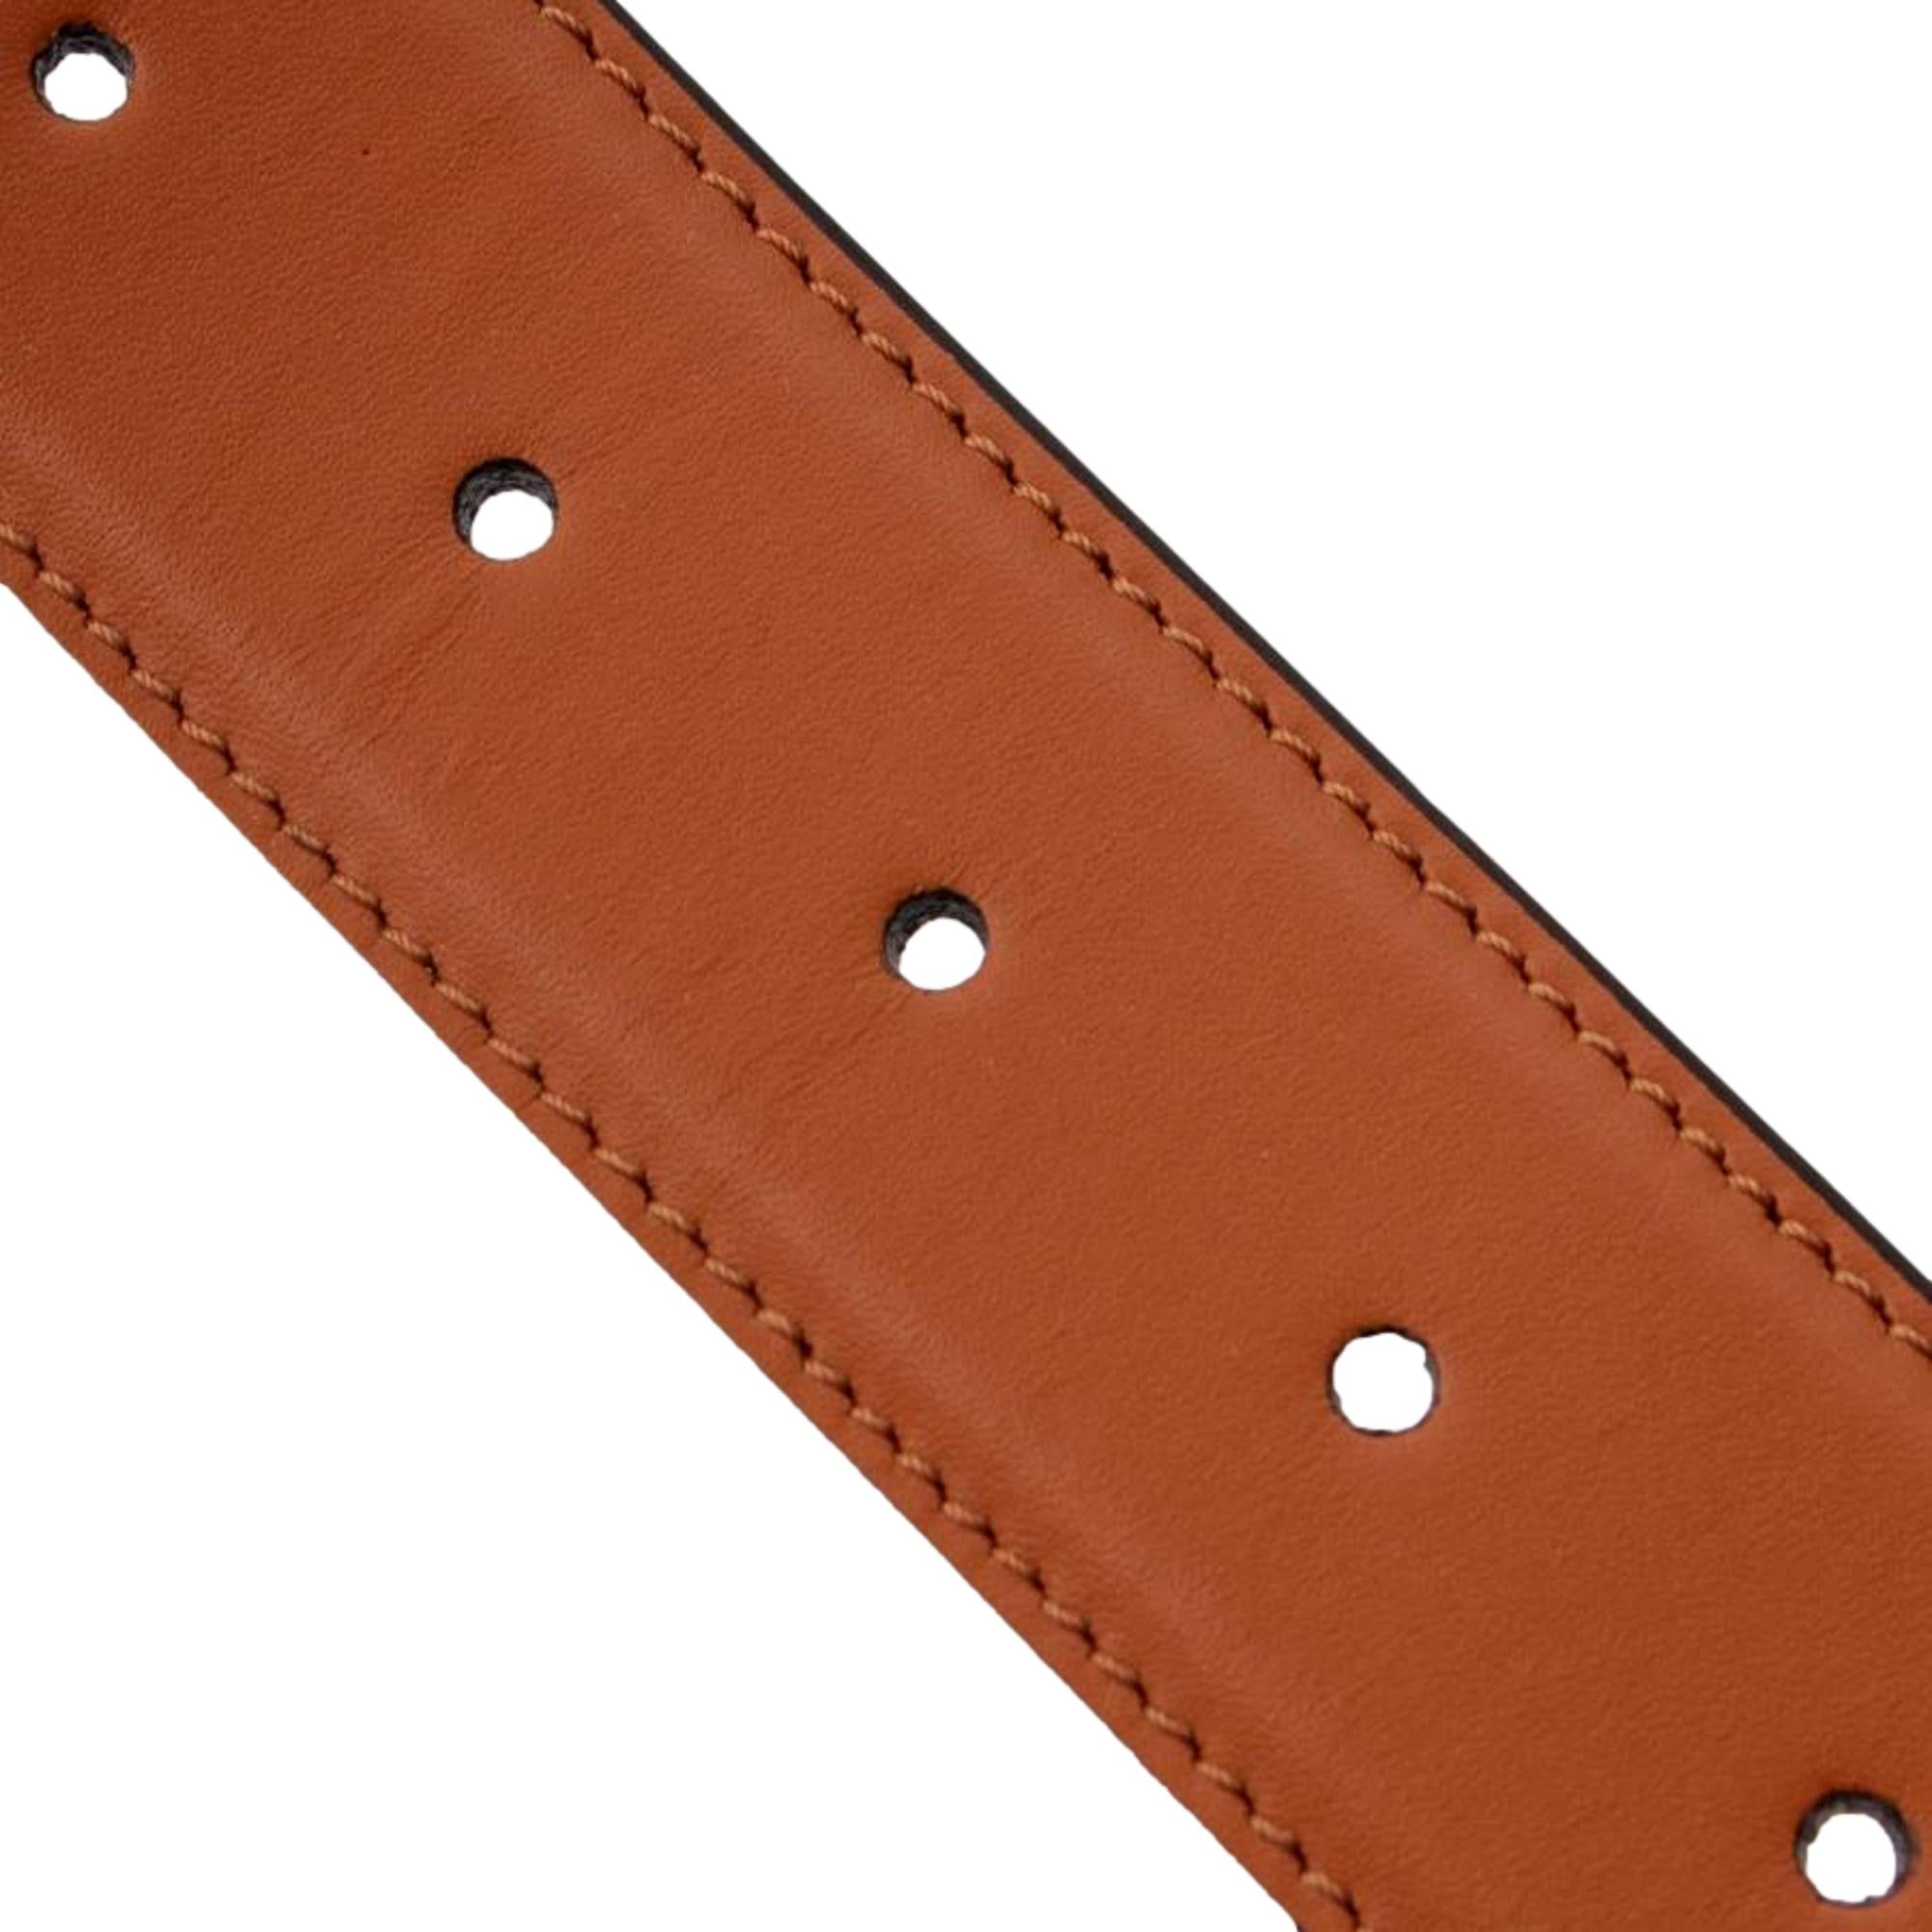 Fendi First Gold Logo Cuoio Brown Calf Leather Belt Size 90